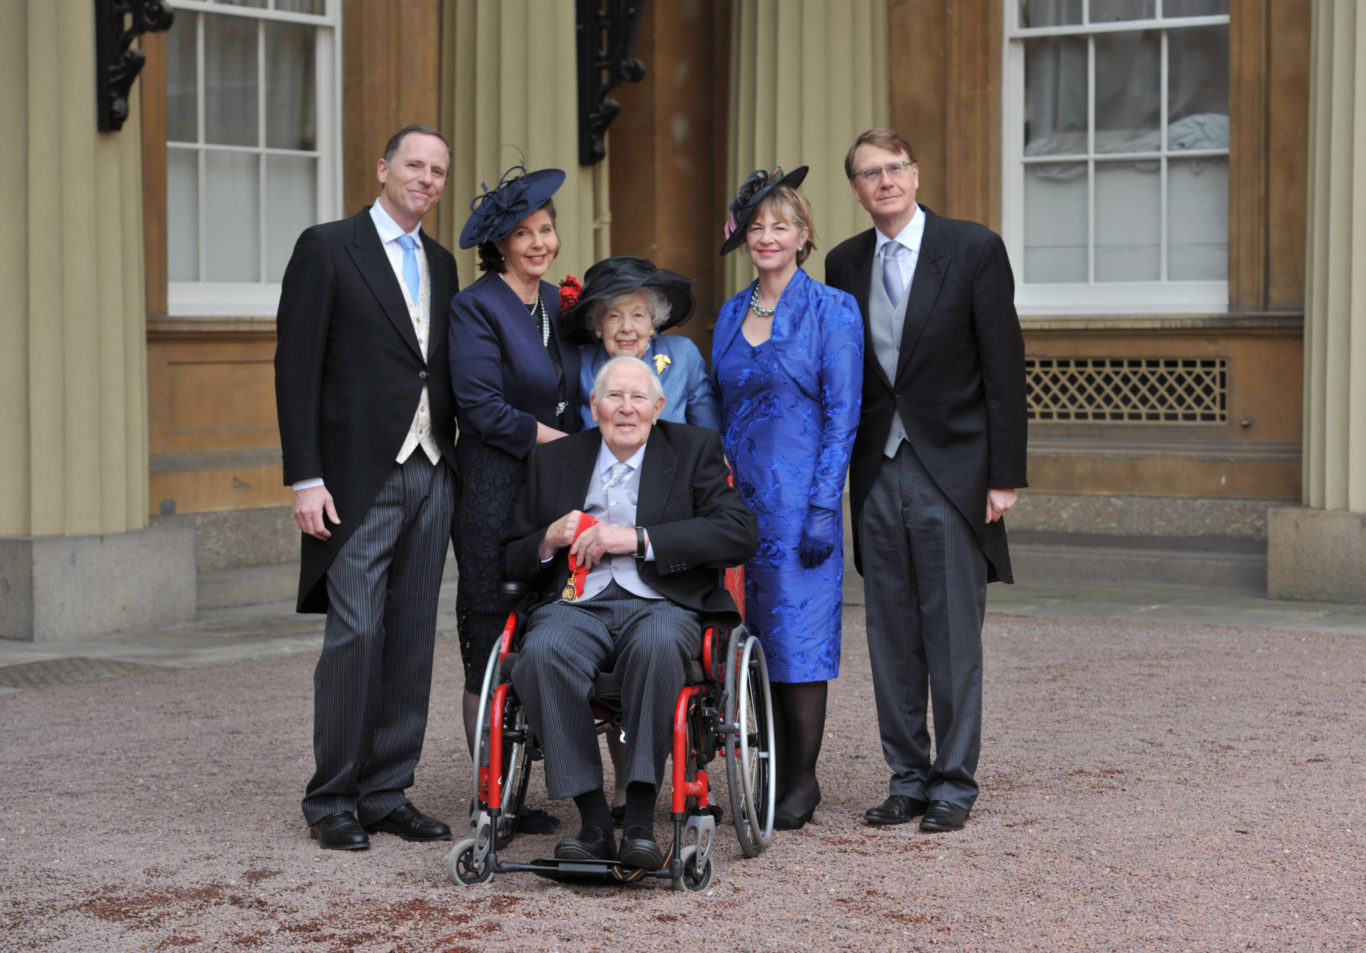 Outside Buckingham Palace with his family (PA)